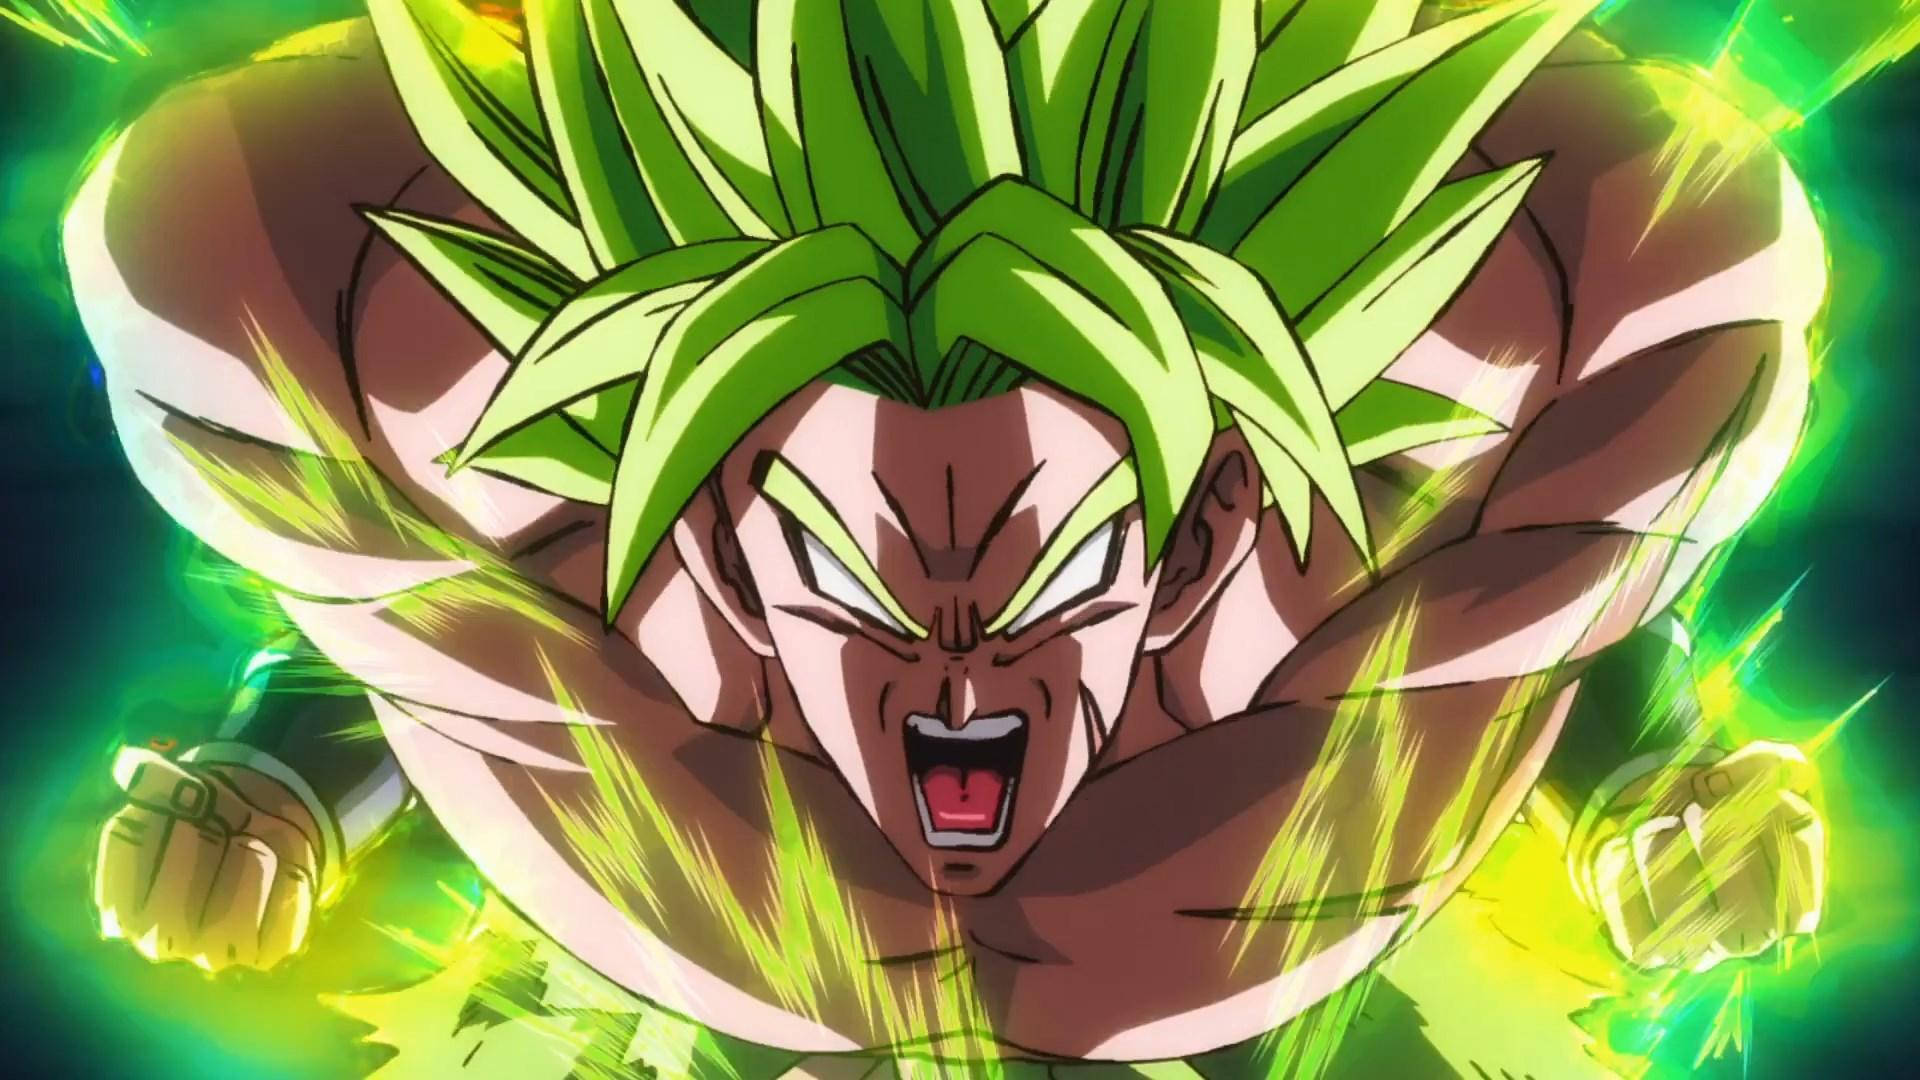 Free Broly Wallpaper Downloads, [100+] Broly Wallpapers for FREE |  